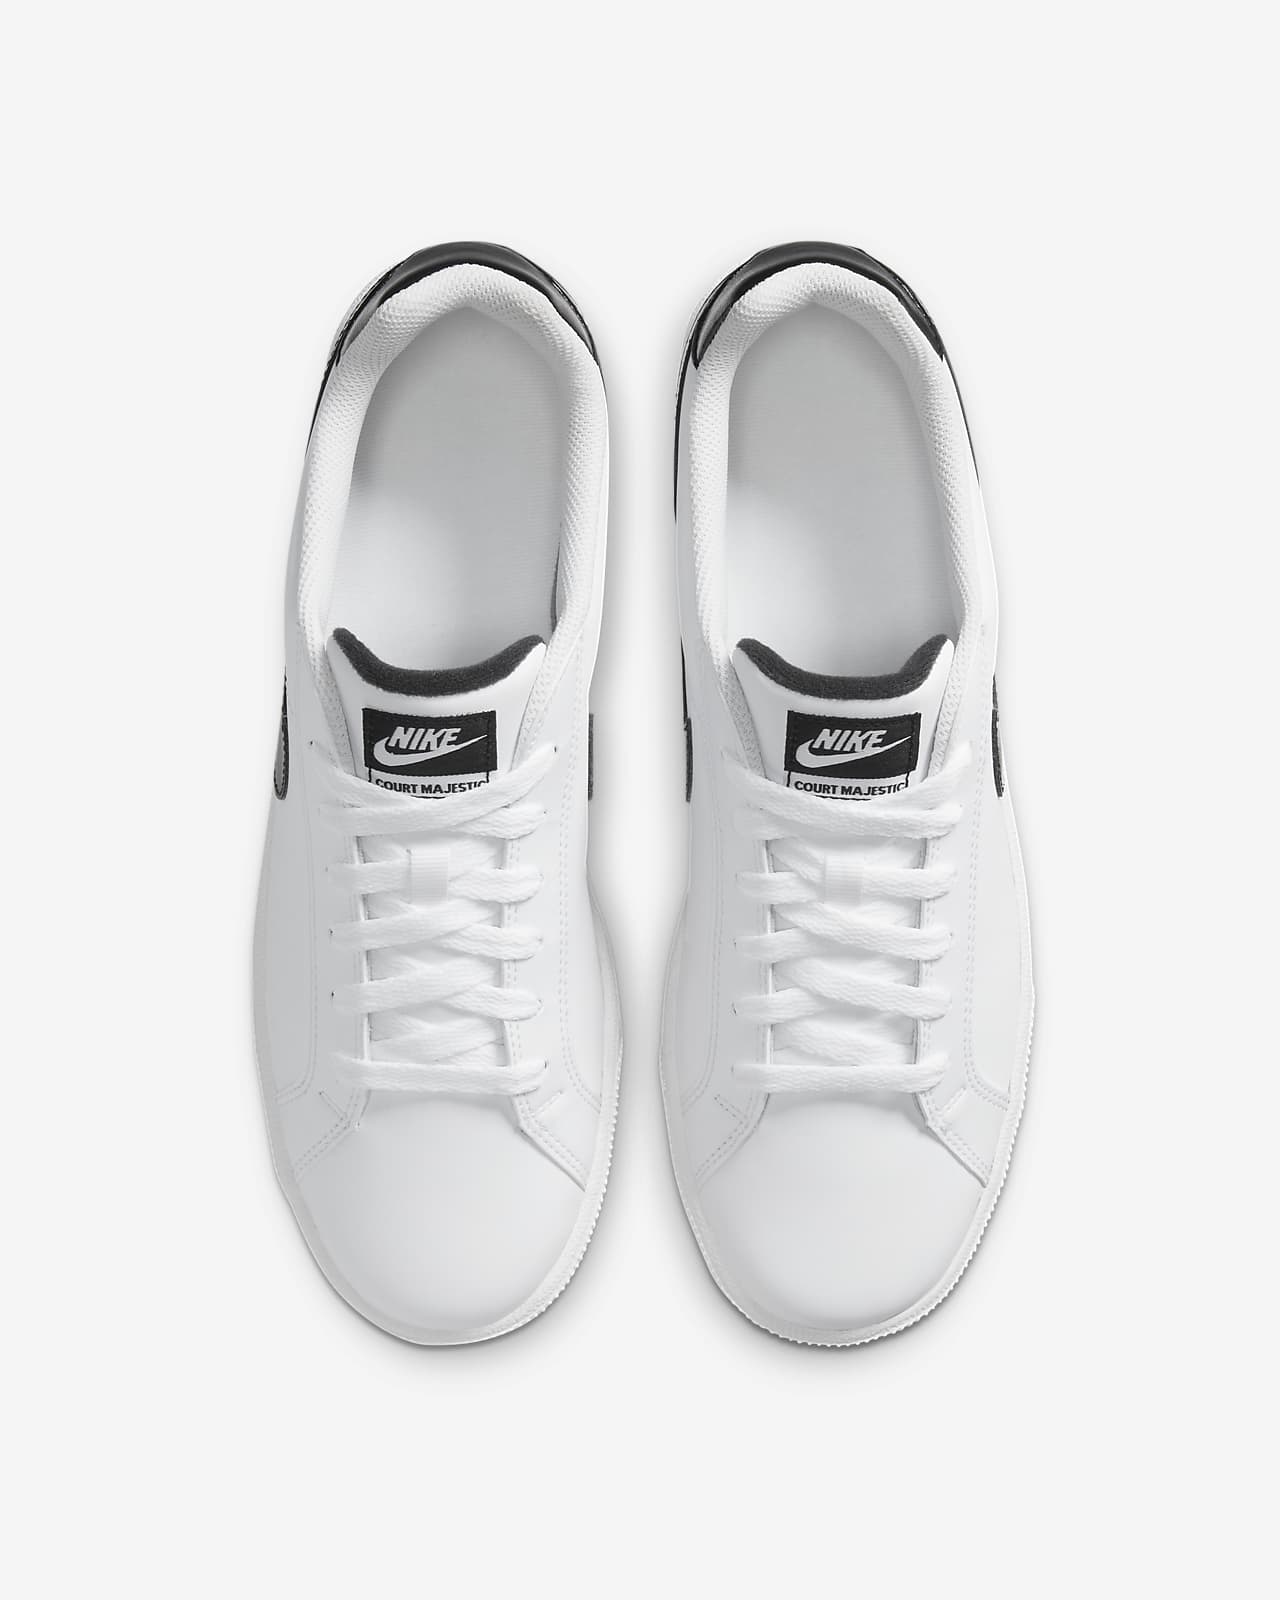 white leather nike shoes mens